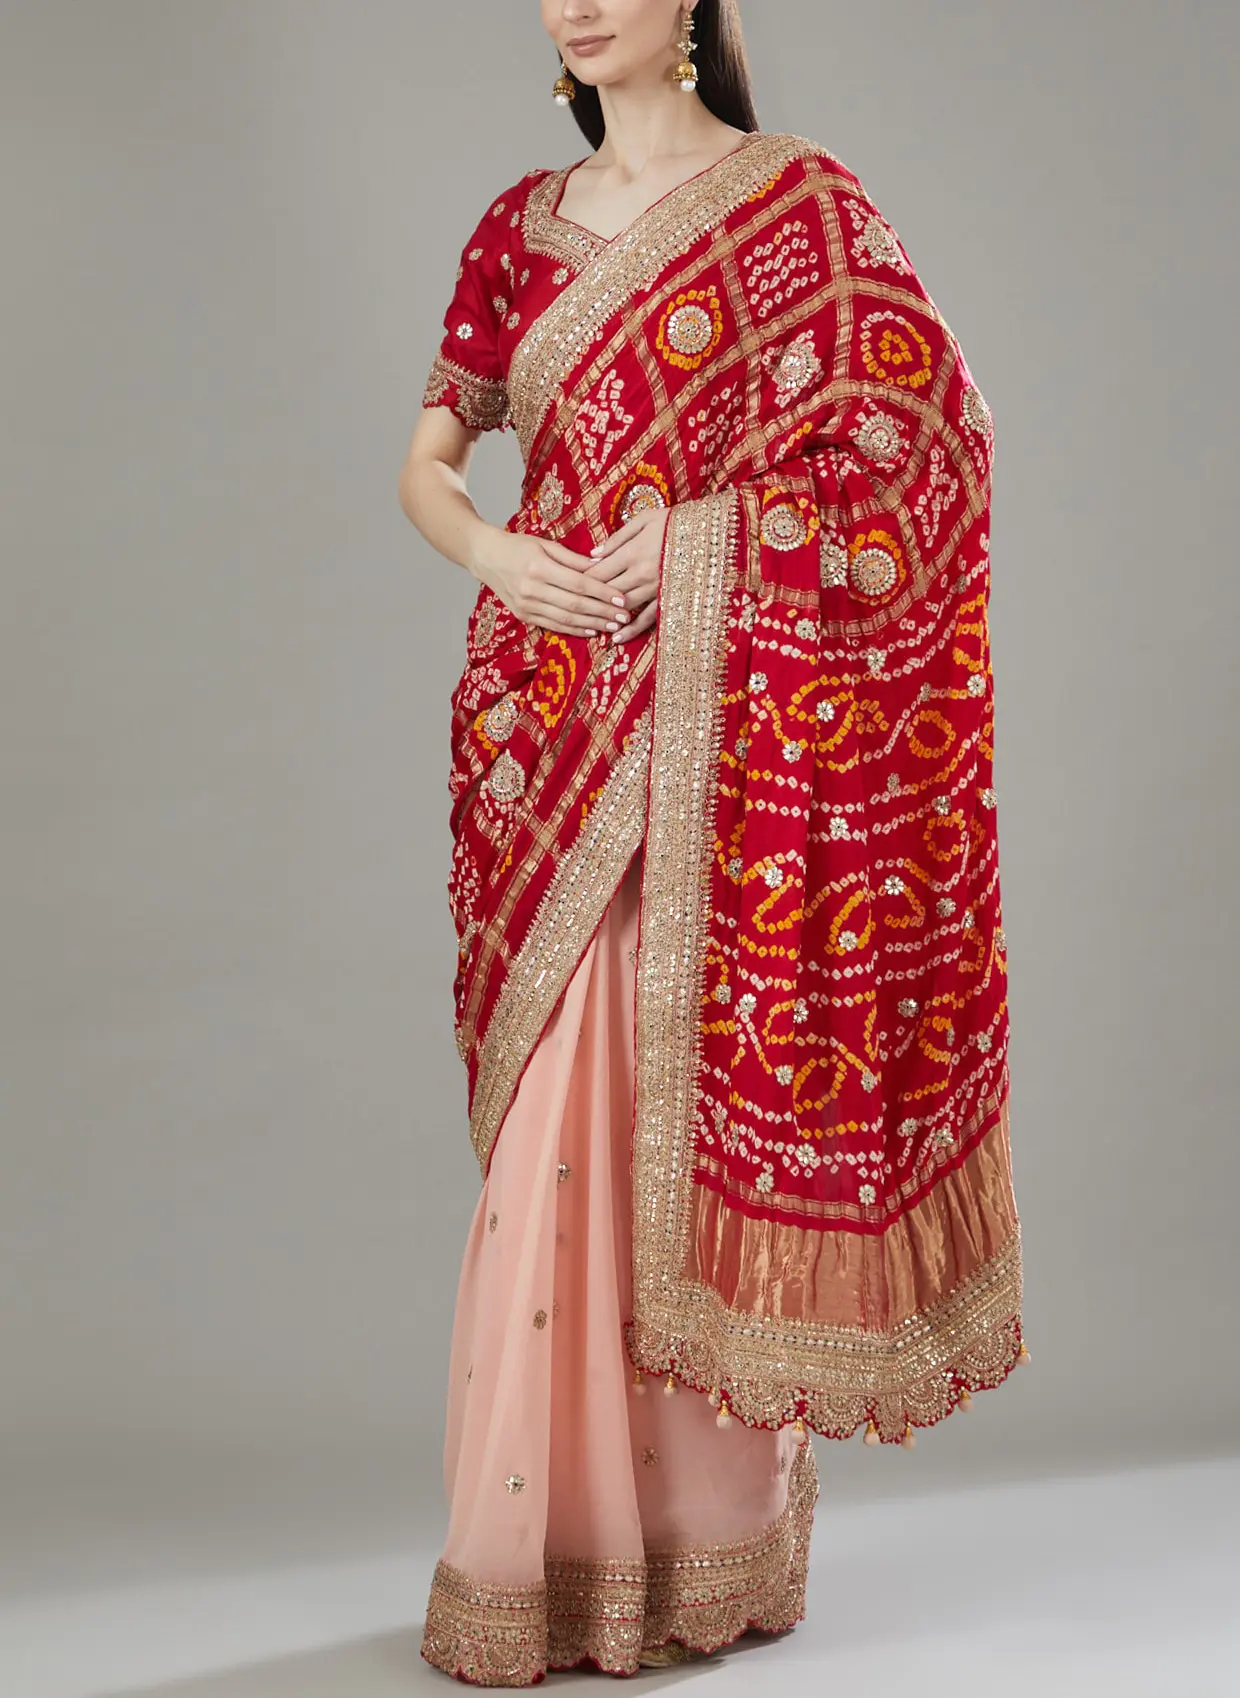 Buy new trend sarees 2019 in India @ Limeroad | page 2-totobed.com.vn